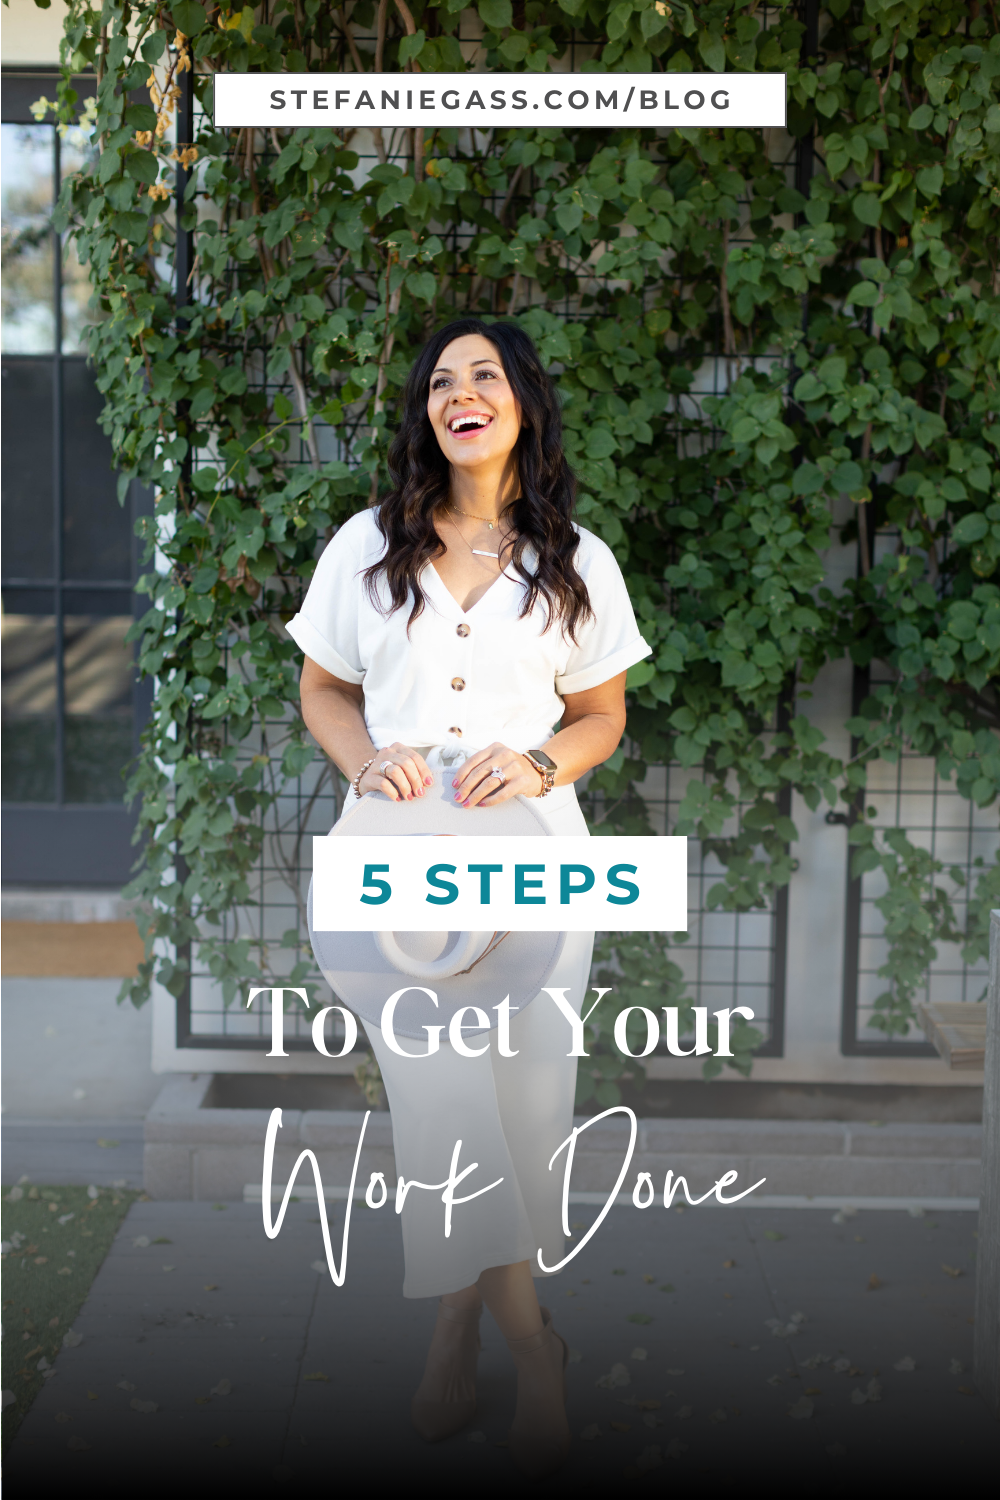 smiling brown haired woman holding a hat in her hands Text says: 5 Steps to Get Your Work Done